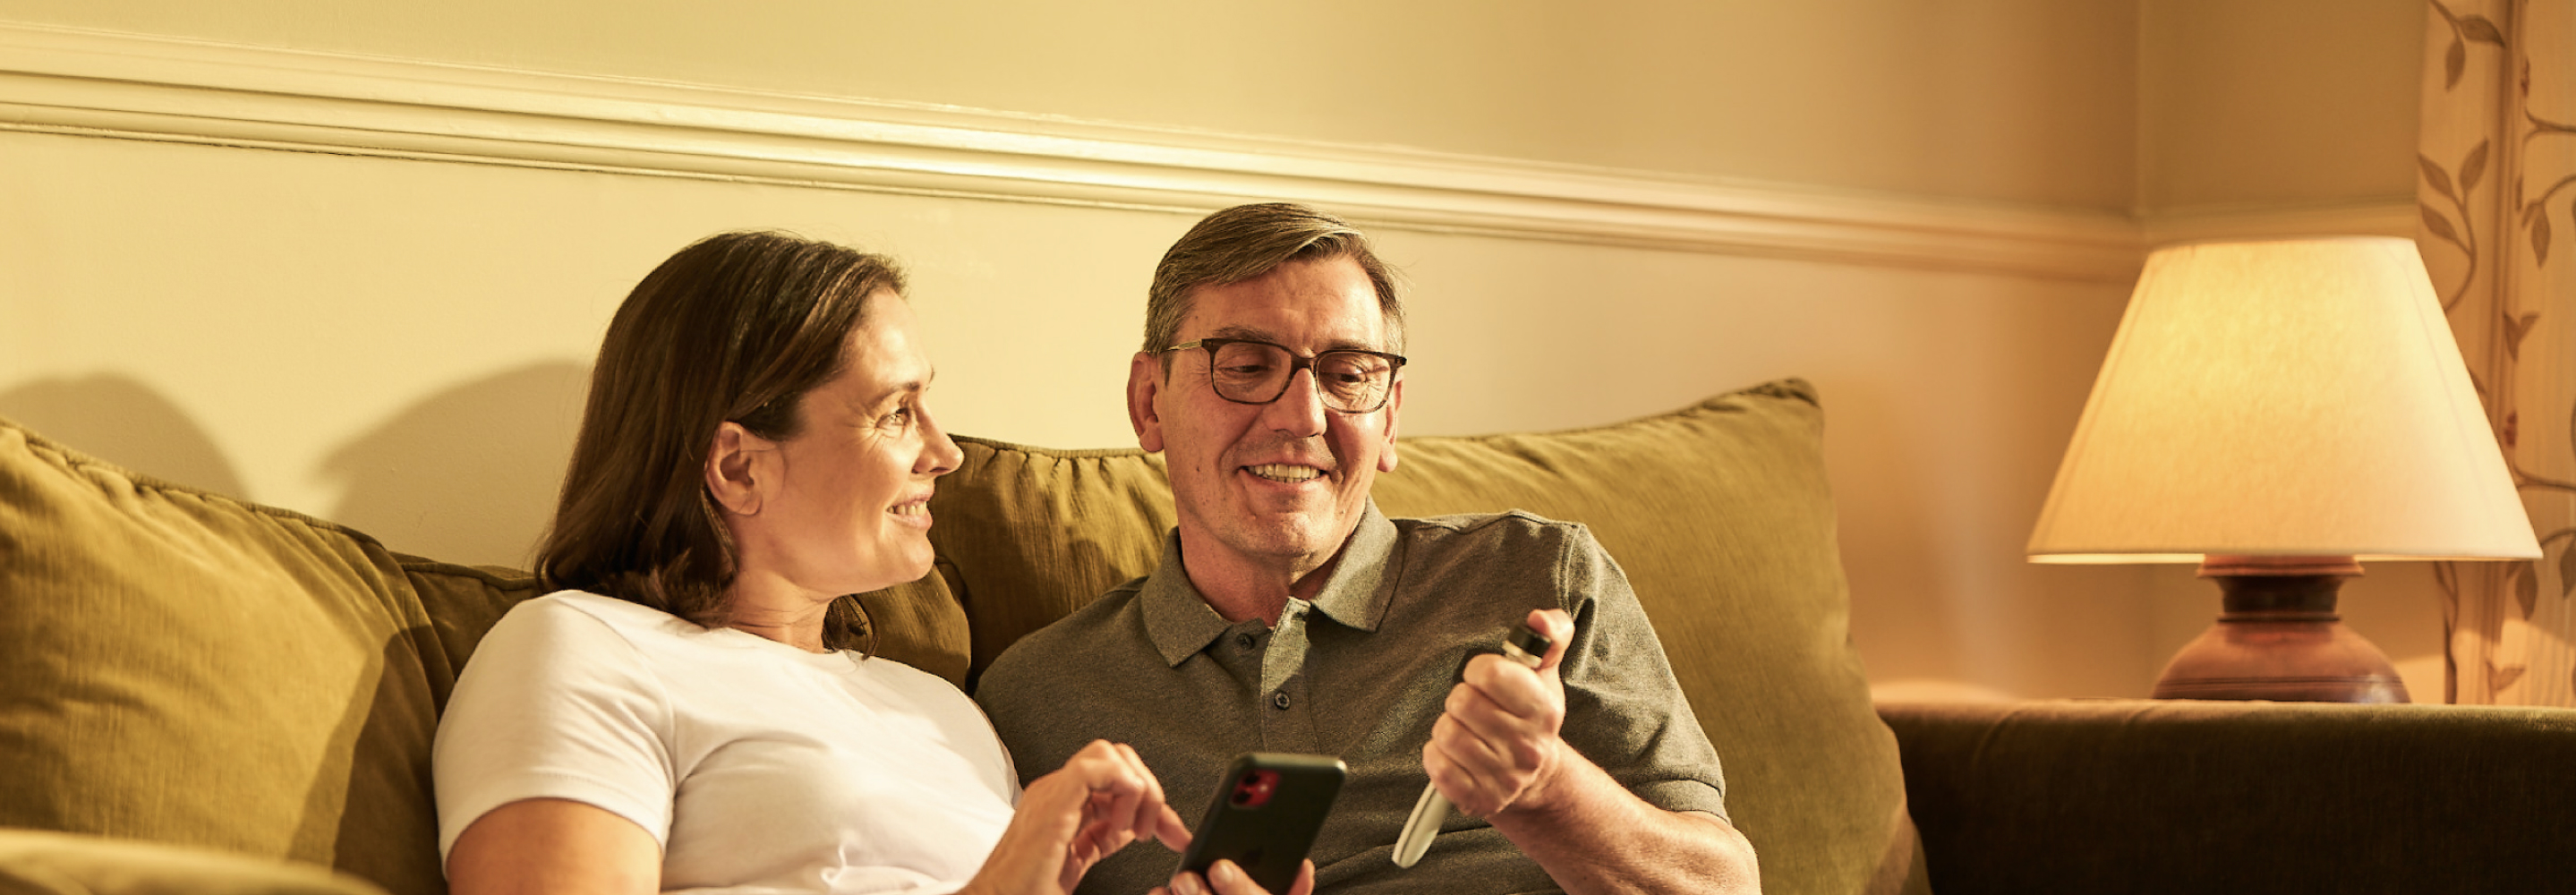 A man and a woman sit together. She holds a phone while smiling at him. He is smiling back while pressing a Tempo Smart Button on his Tempo Pen.